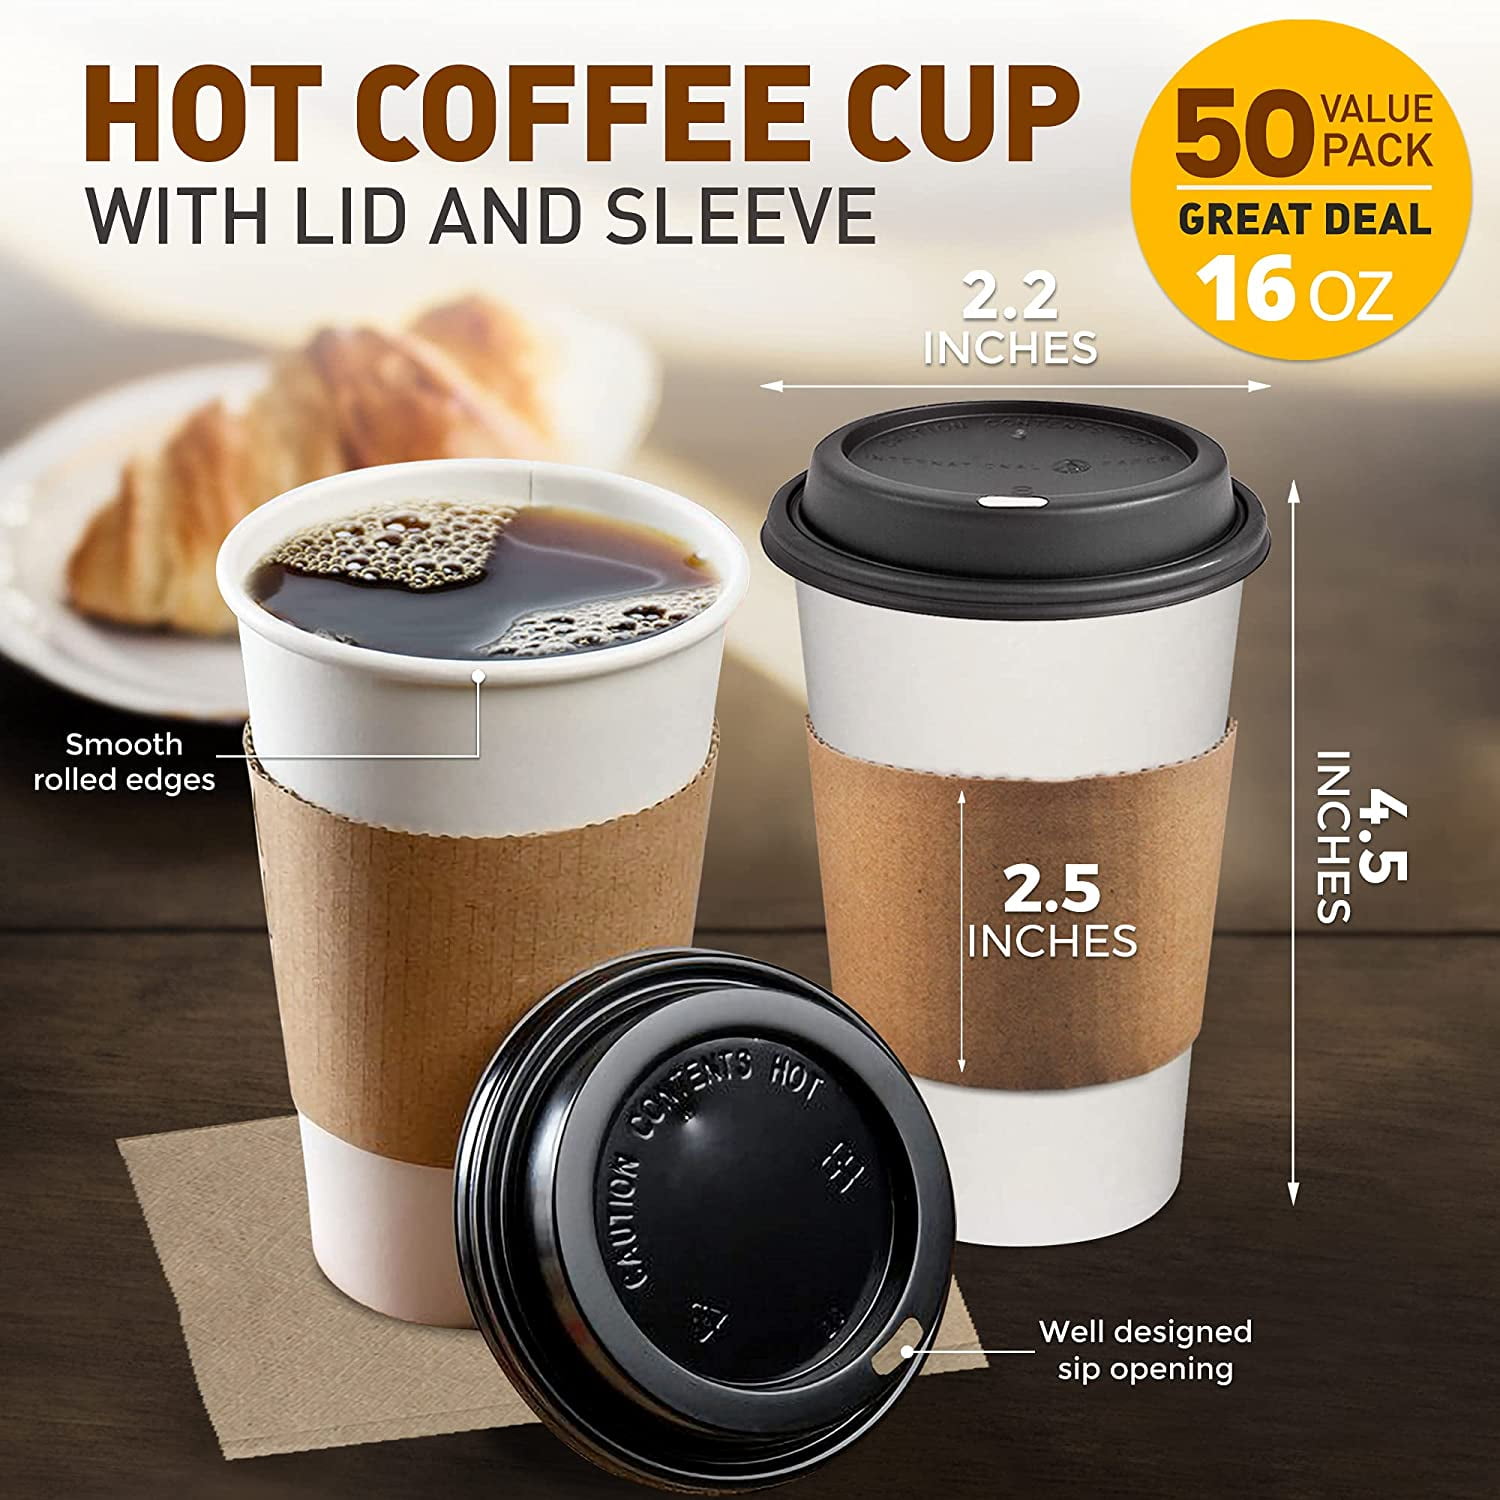 Full Set 16oz White Paper Coffee Cups BUNDLE with White LIDS and SLEEVES 